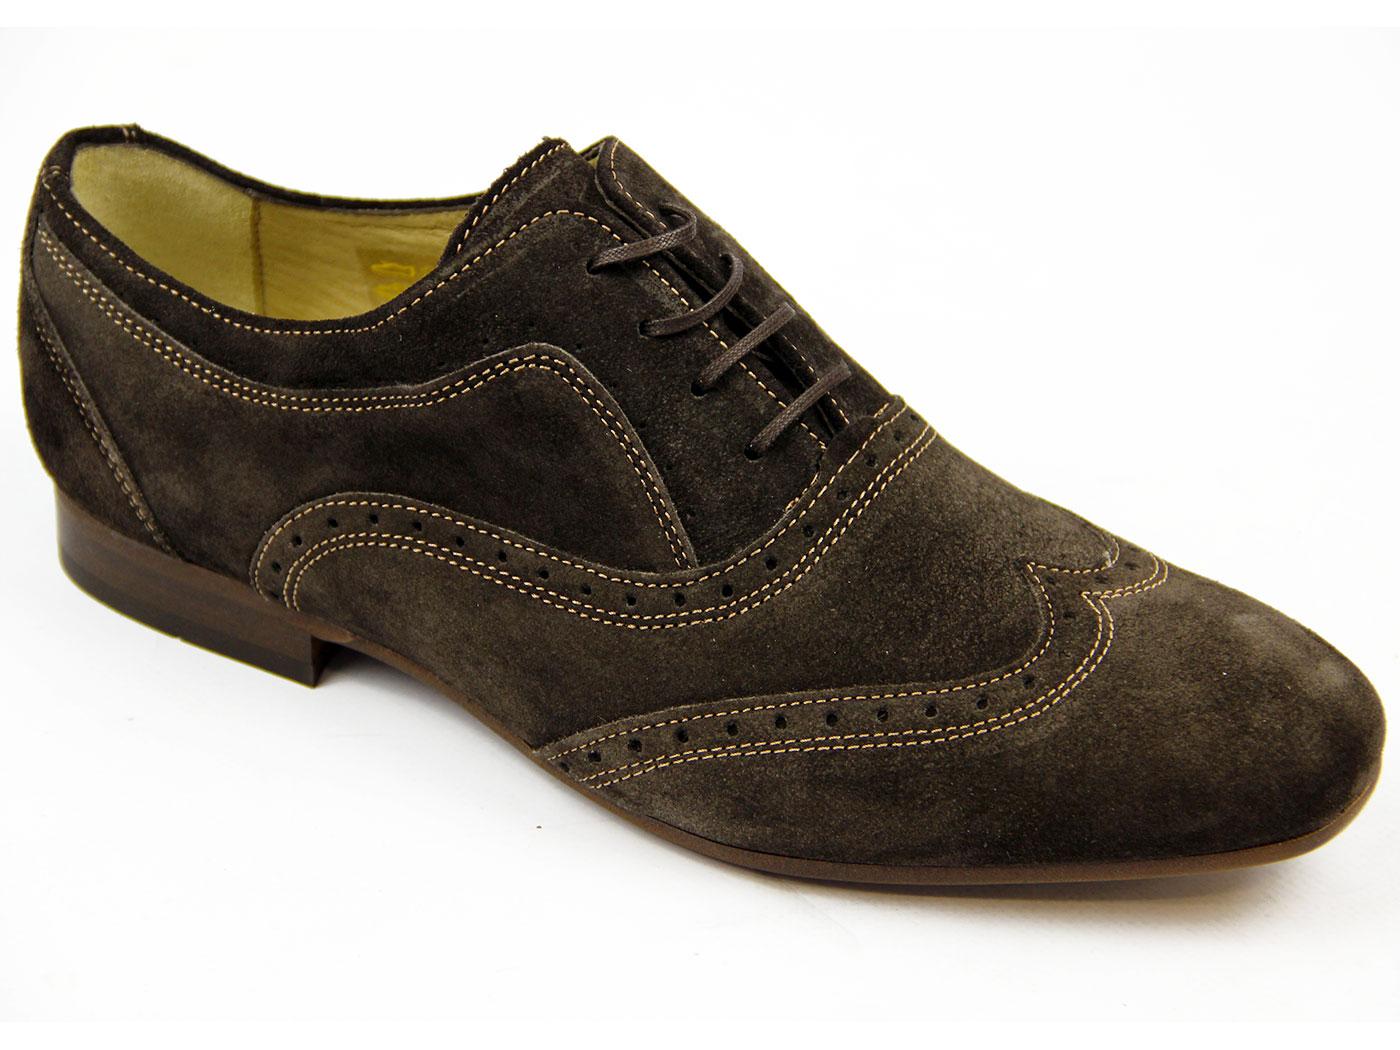 Francis H by HUDSON Retro 60s Mod Suede Brogues